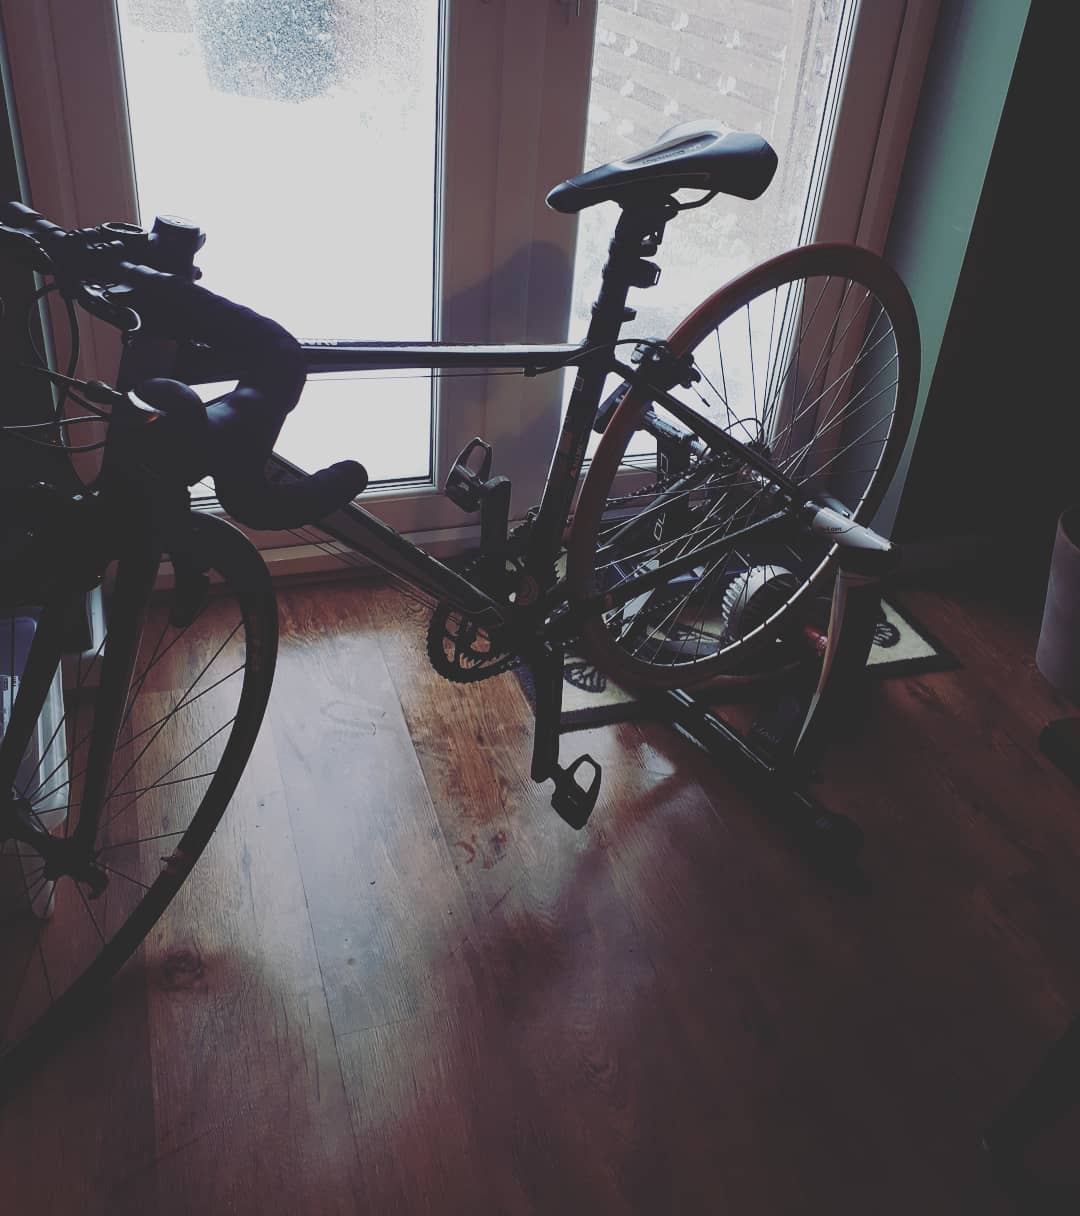 On a snowy day like today good job Ive got my turbo trainer to get a session in! To be honest this has been a god send to keep me cycling fit during my pregnancy too. #cycling #turbotrainer #cycle #bike #triathlon #duathlon #pregnancy #exerciseinpregnancy #preandpostnatalfitness #preandpostnatalexercise #pregnant